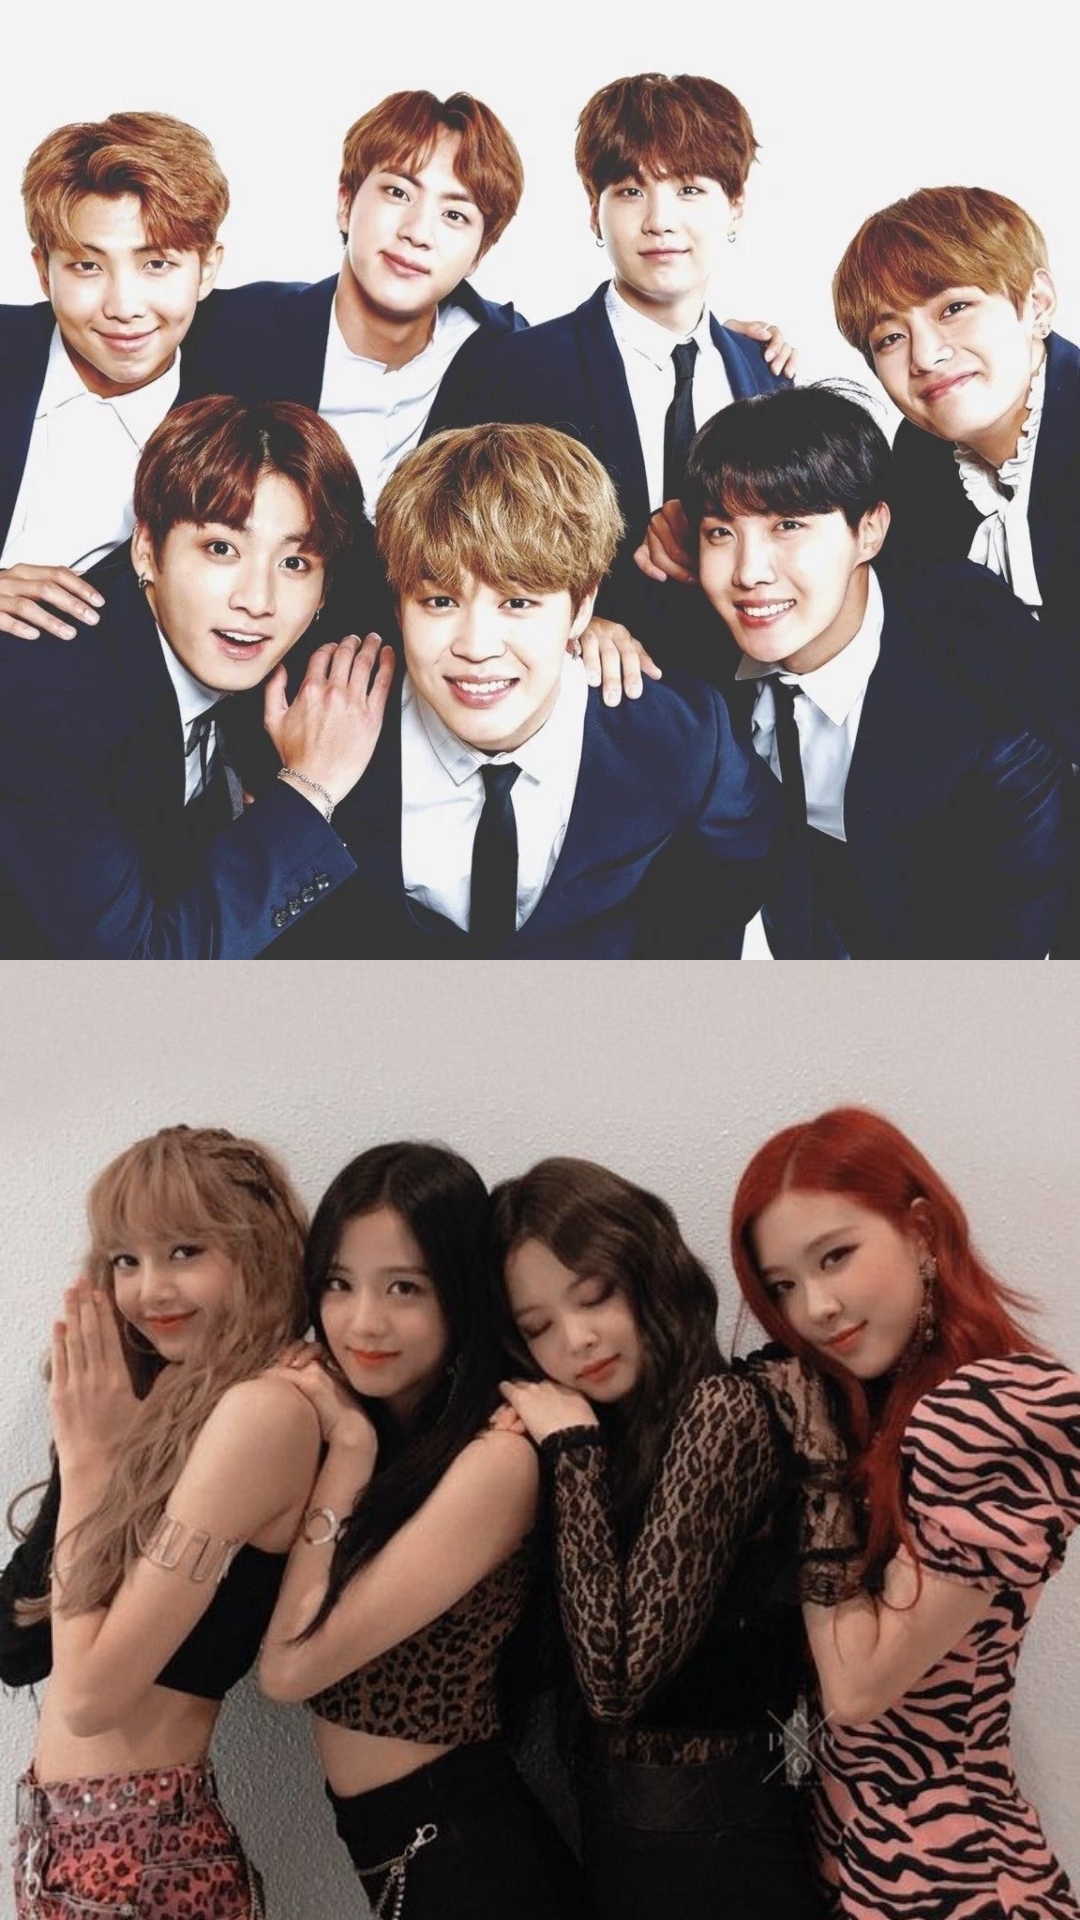 BTS, BLACKPINK &amp; others; know the most-streamed Kpop artists and songs of 2022